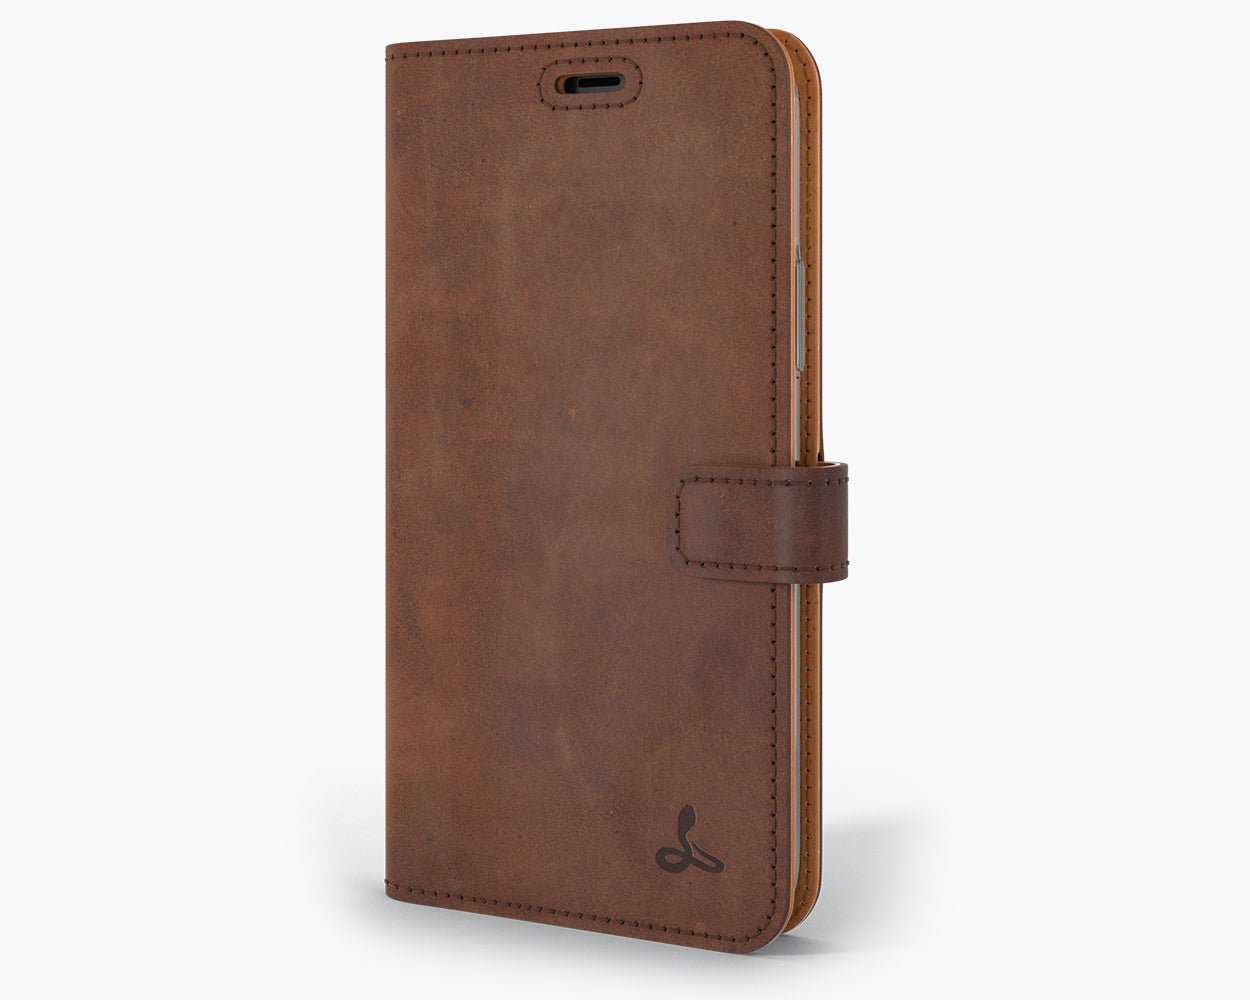 Apple iPhone 11 Pro Max - Vintage Leather Wallet (Almost Perfect) Chestnut Brown Apple iPhone 11 Pro Max - Snakehive UK